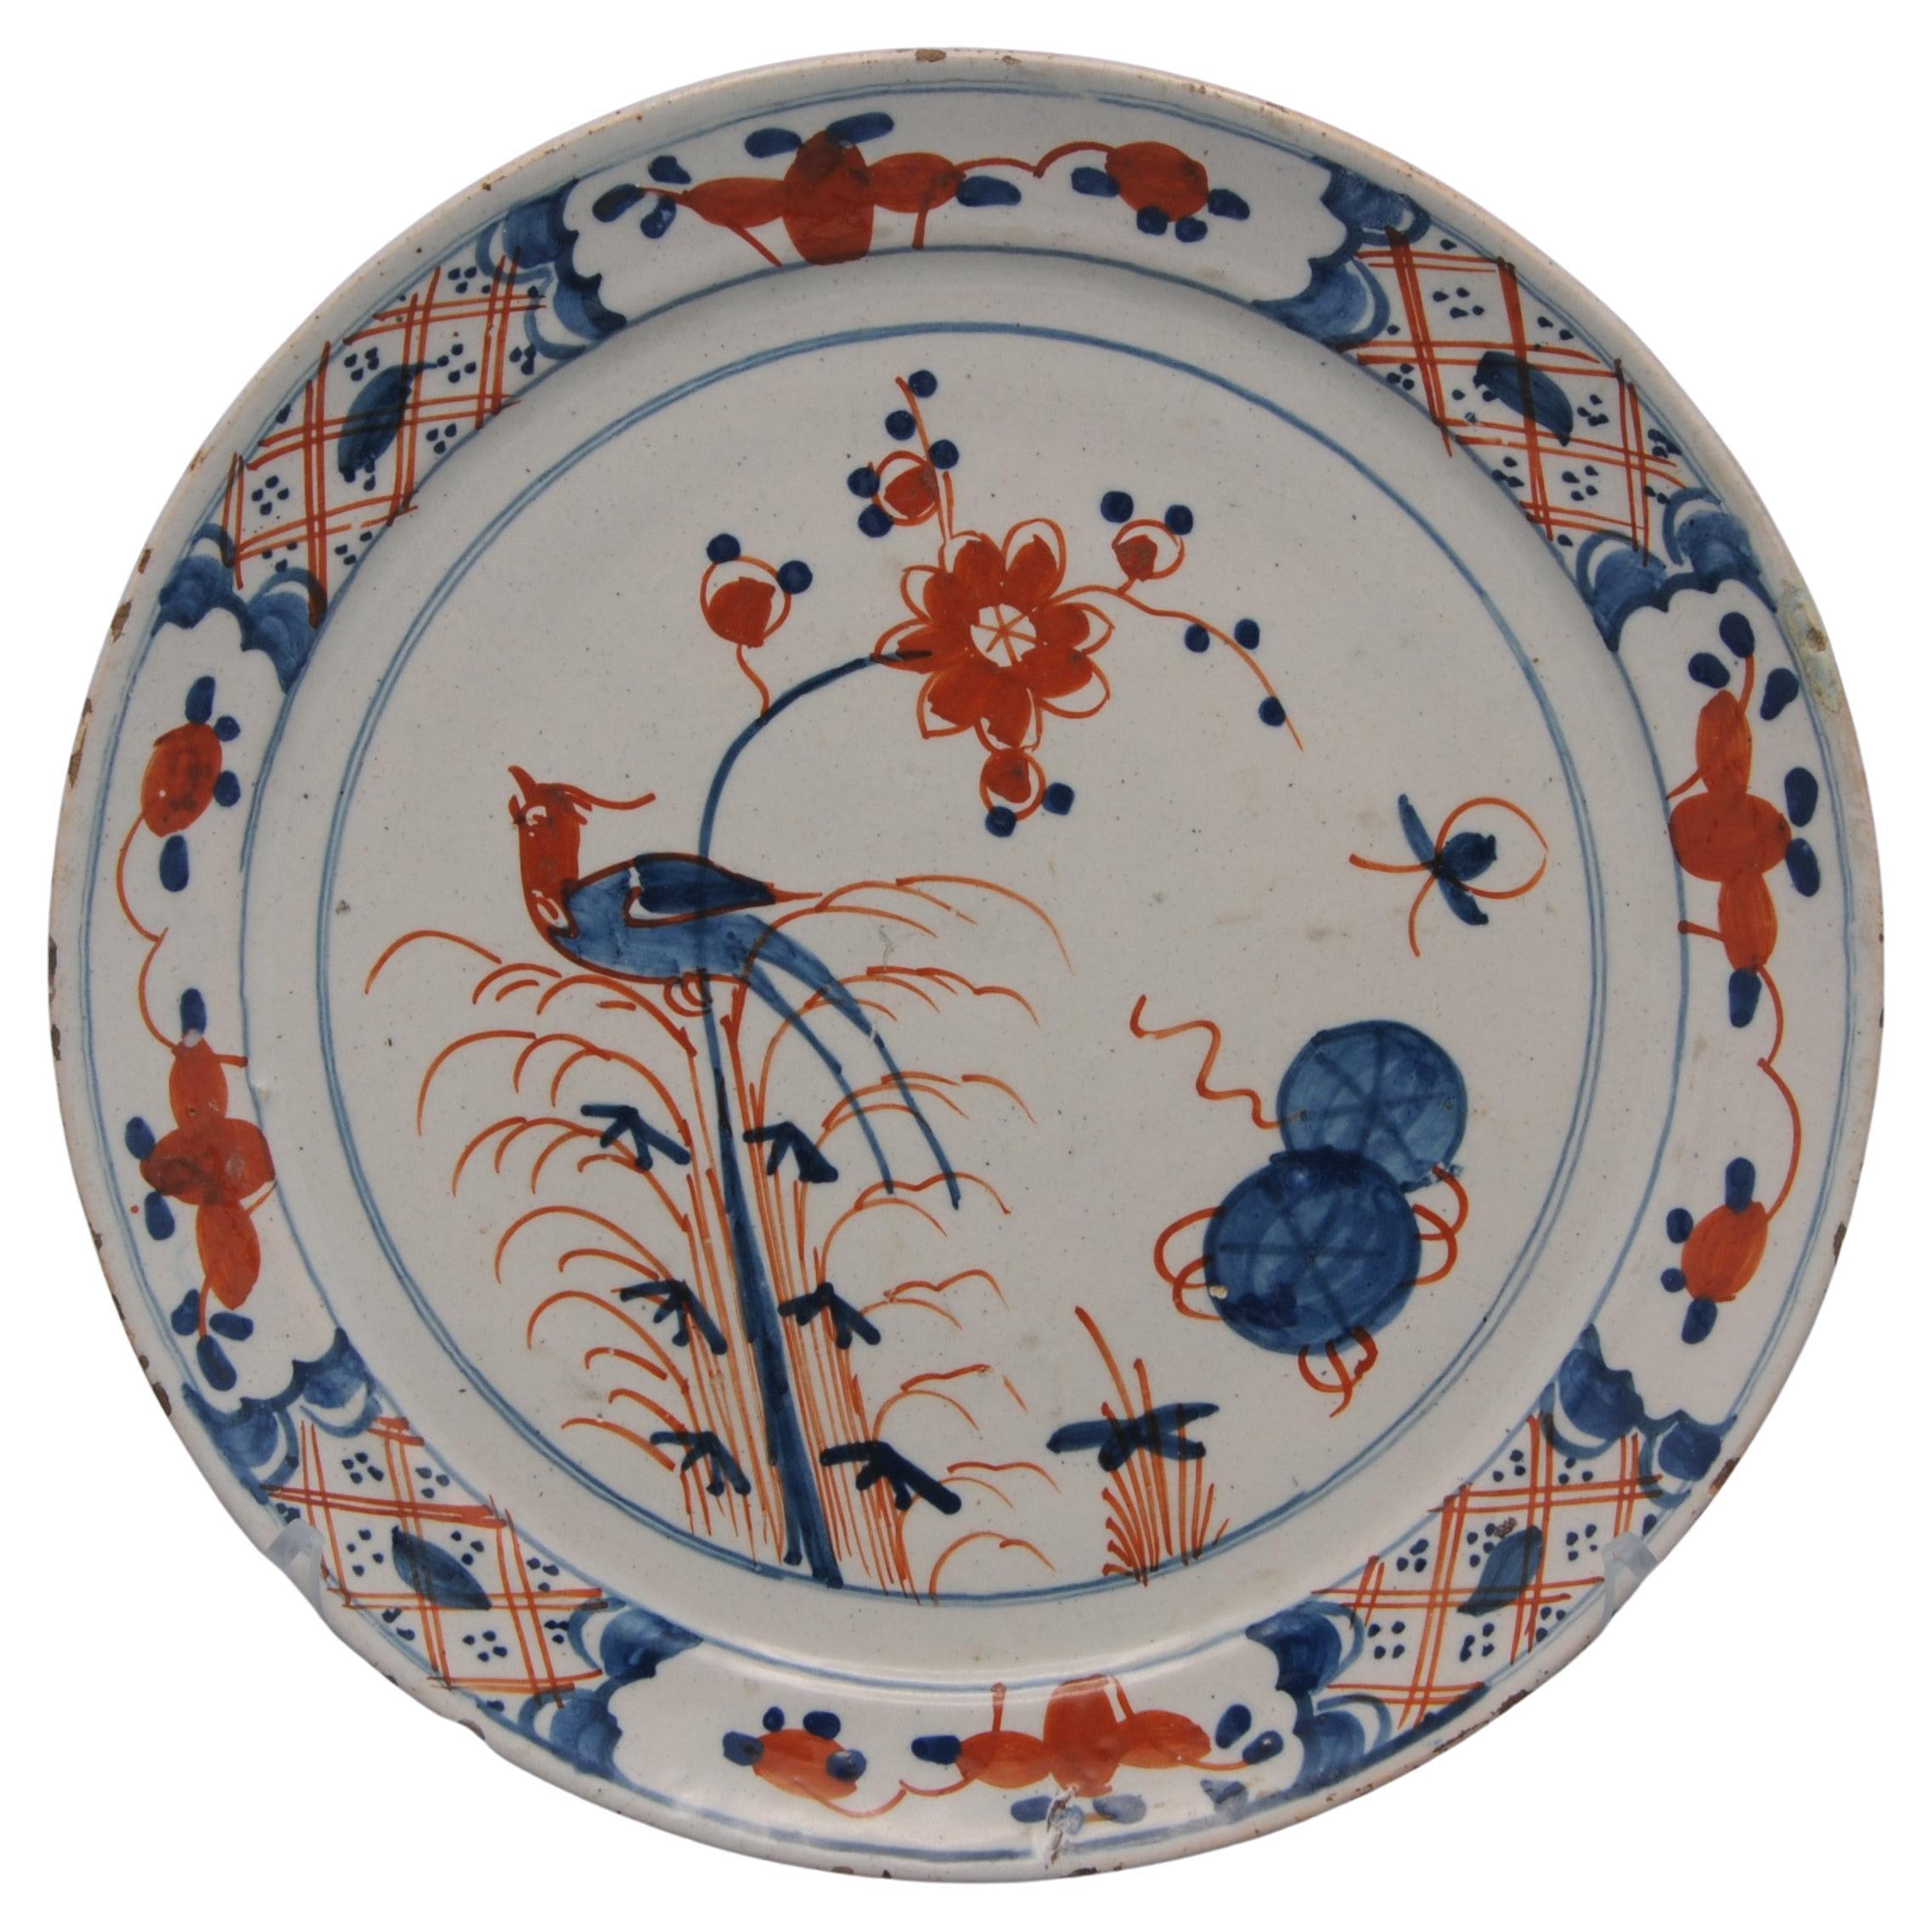 Delft  - 18th century Polychrome Chinoiserie Plate